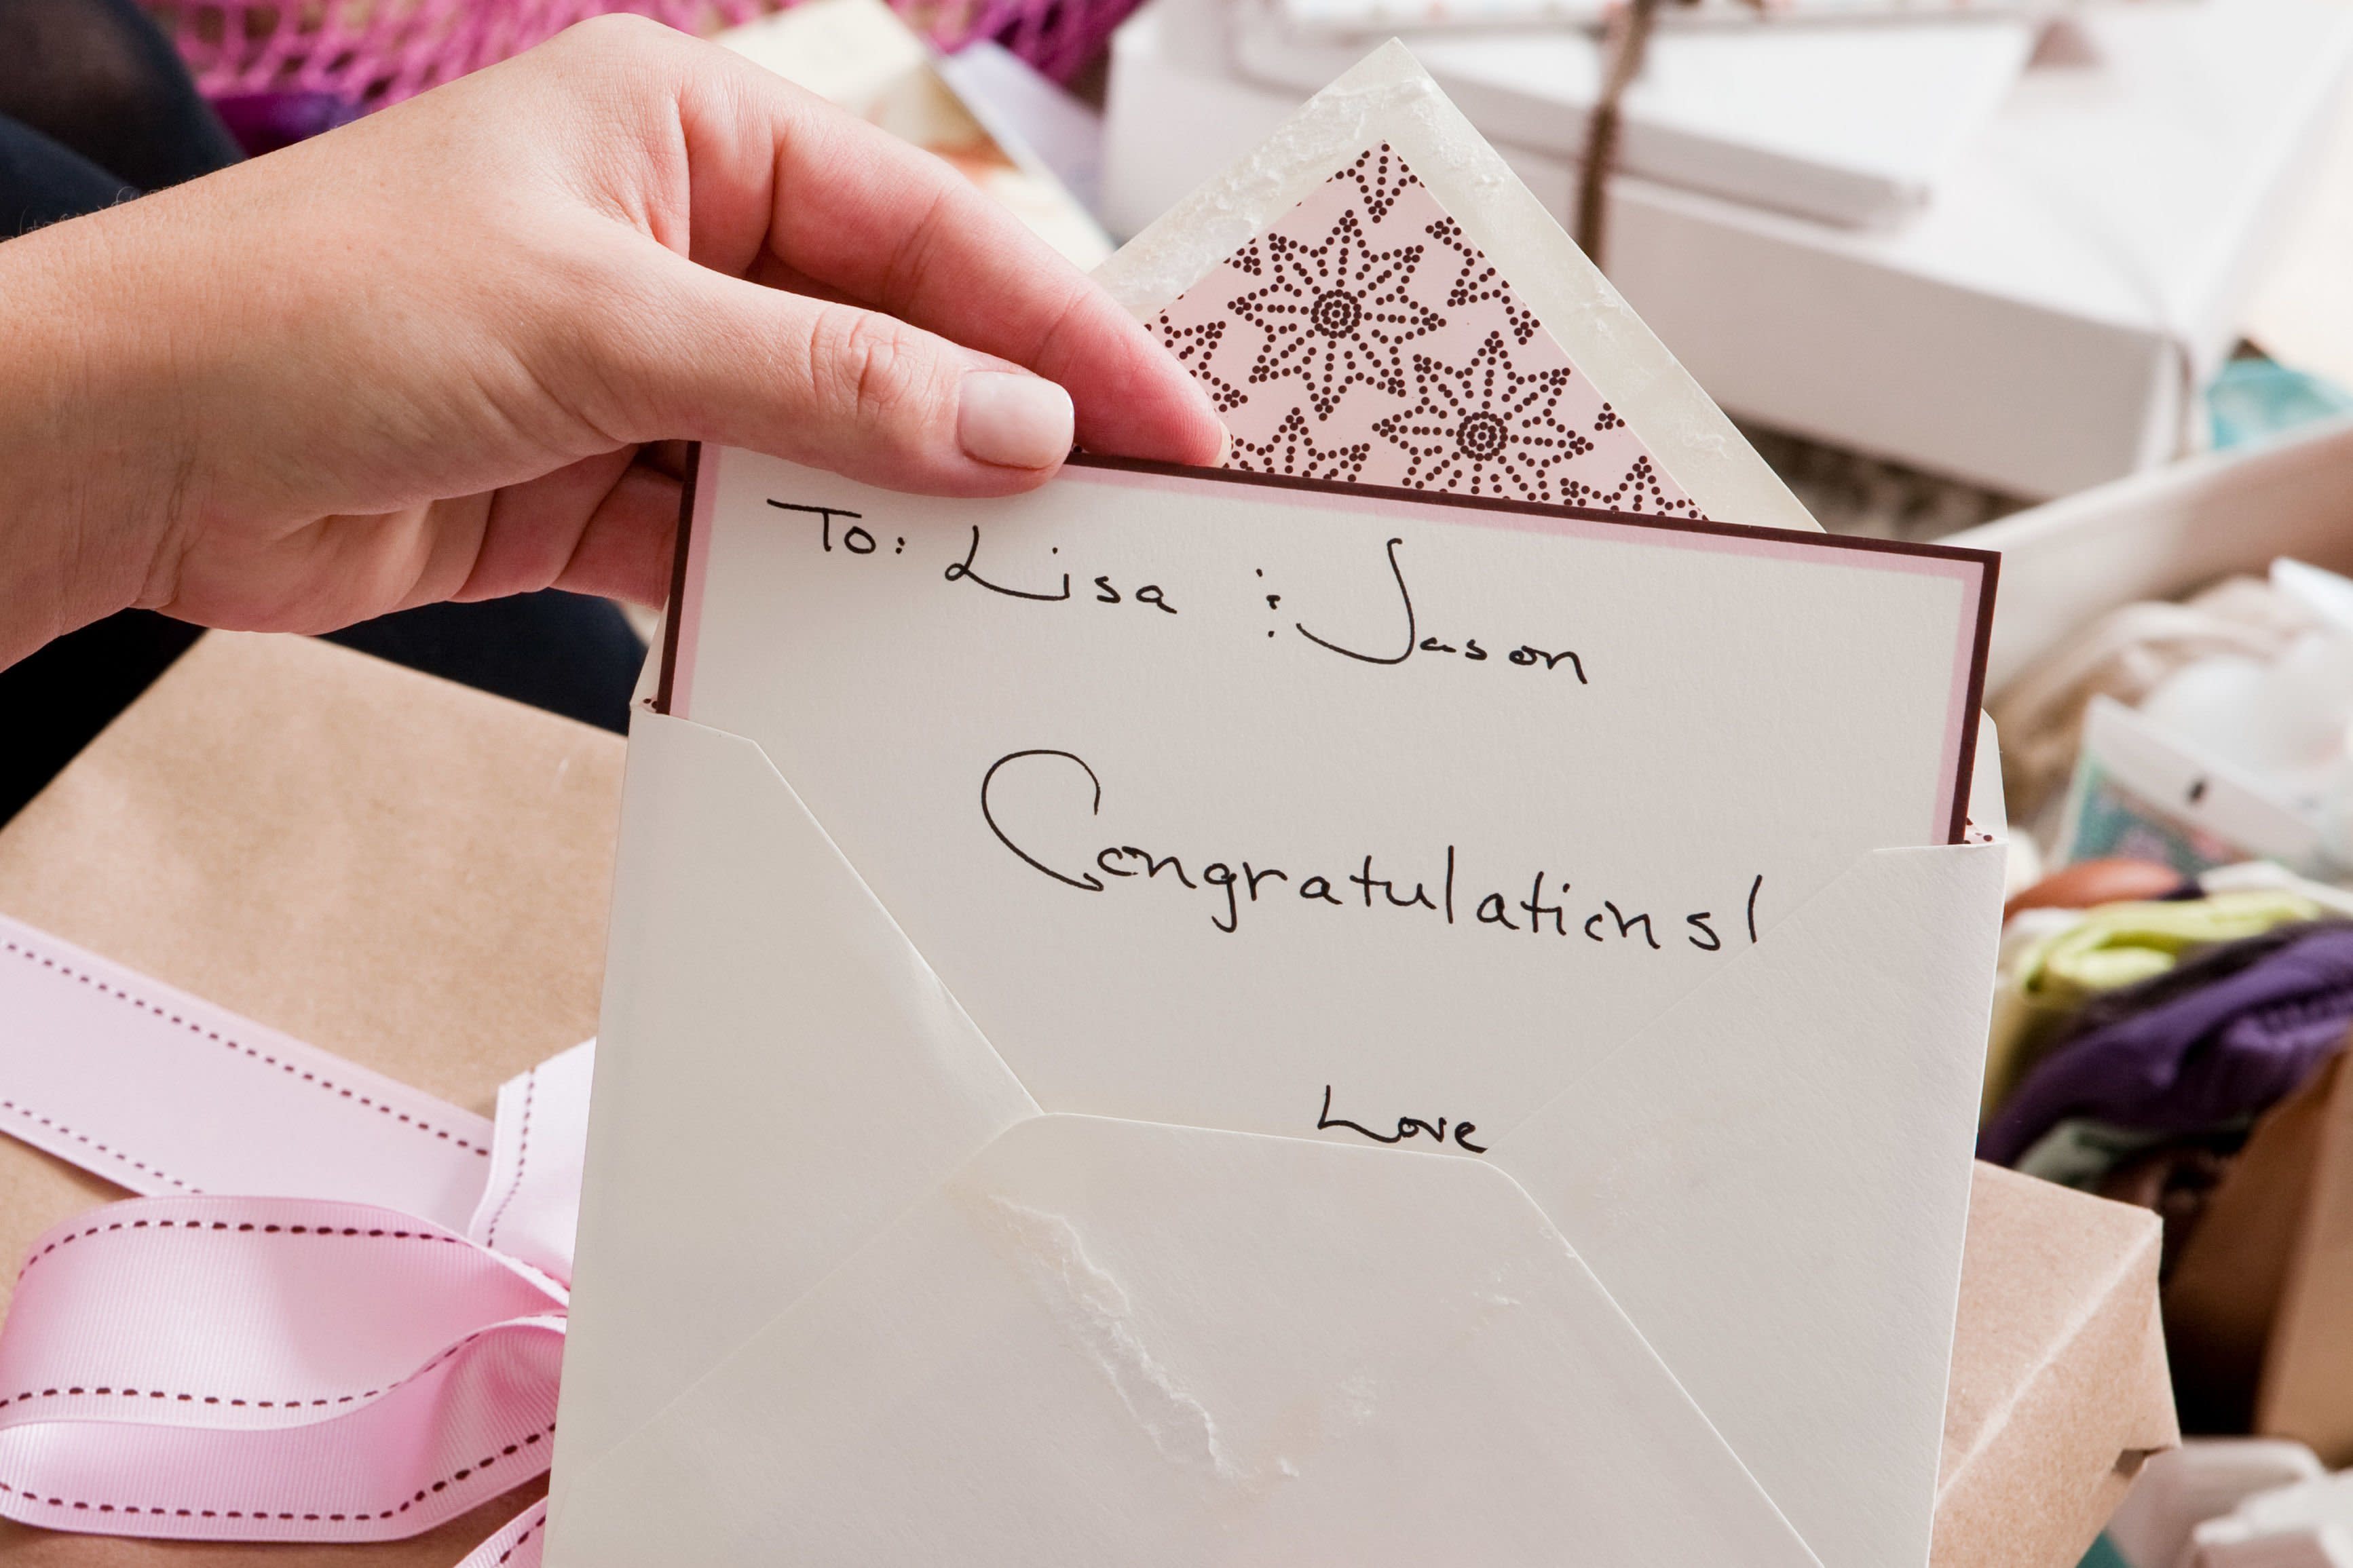 33 Things to Write in a Wedding Card If You’re Not Sure What’s Appropriate